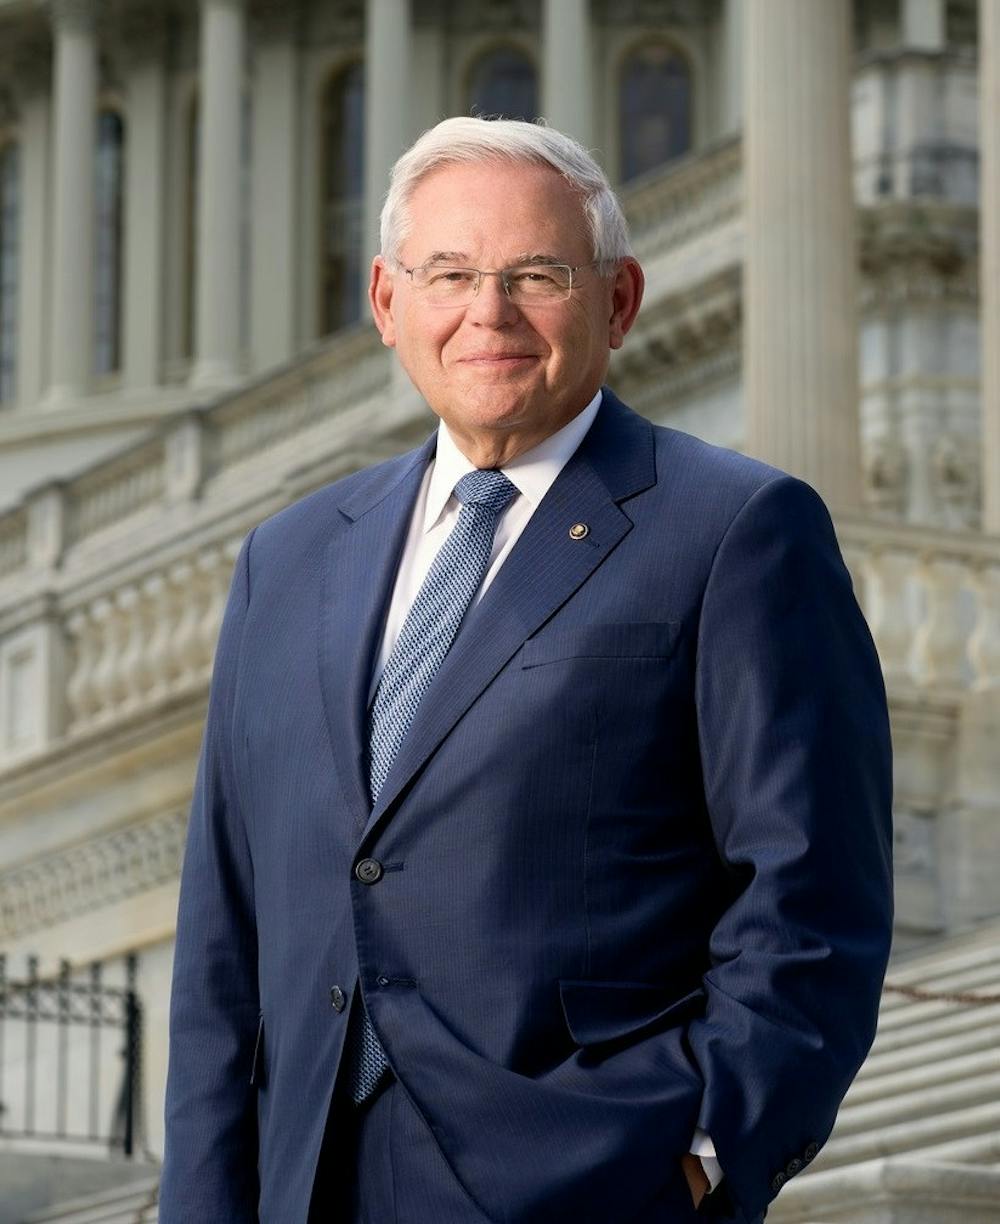 <p><em>New Jersey Sen. Bob Menendez and his wife, Nadine, were charged with bribery as a result of accepting hundreds of thousands of cash and gold bars in exchange for power (Photo courtesy of Wikimedia Commons / “</em><a href="https://commons.wikimedia.org/wiki/File:Senator_Bob_Menendez_(2022).jpg" target=""><em>Senator Bob Menendez (2022)</em></a><em>” by United States Senate. April 11, 2022). </em></p>